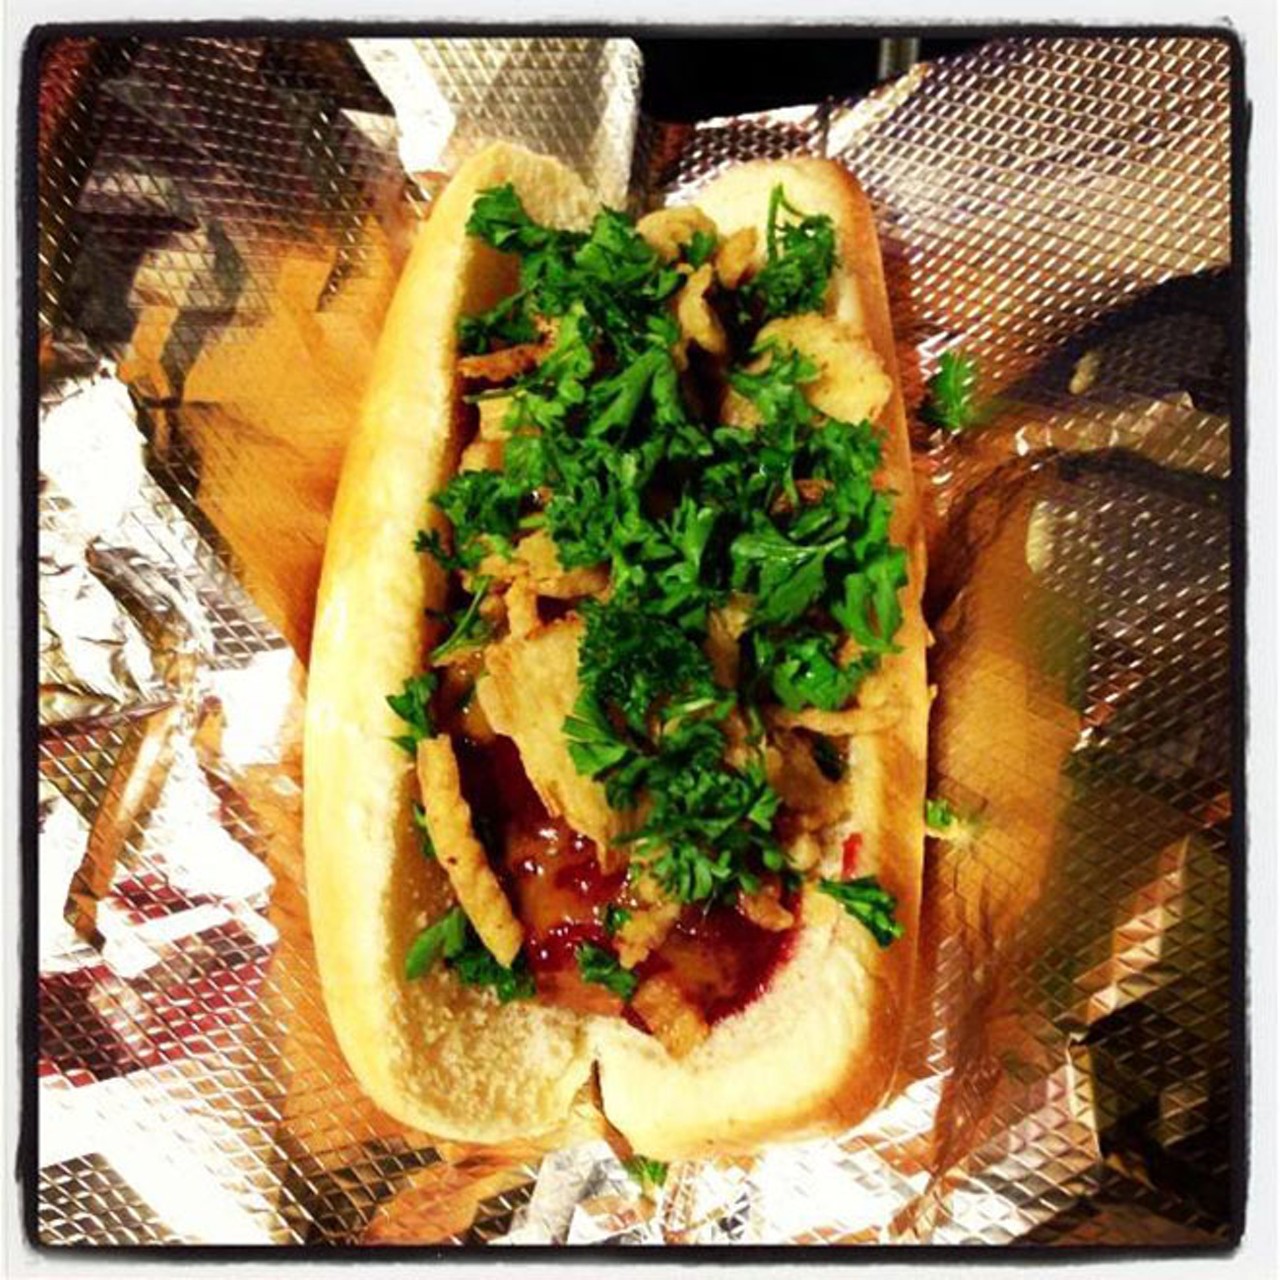 Holiday dog at Vegan Hot Dog Cart
65 N. Orange Ave., 321-303-3689
The VHDC's Holiday Dog &#150; with fried sweet onions, homemade cranberry sauce, Carolina mustard barbecue sauce, and parsley &#150; was named "the top dog in the nation" by PETA last year, if you care about stuff like that. It's also fricking delicious.
Photo via Vegan Hot Dog Cart Facebook